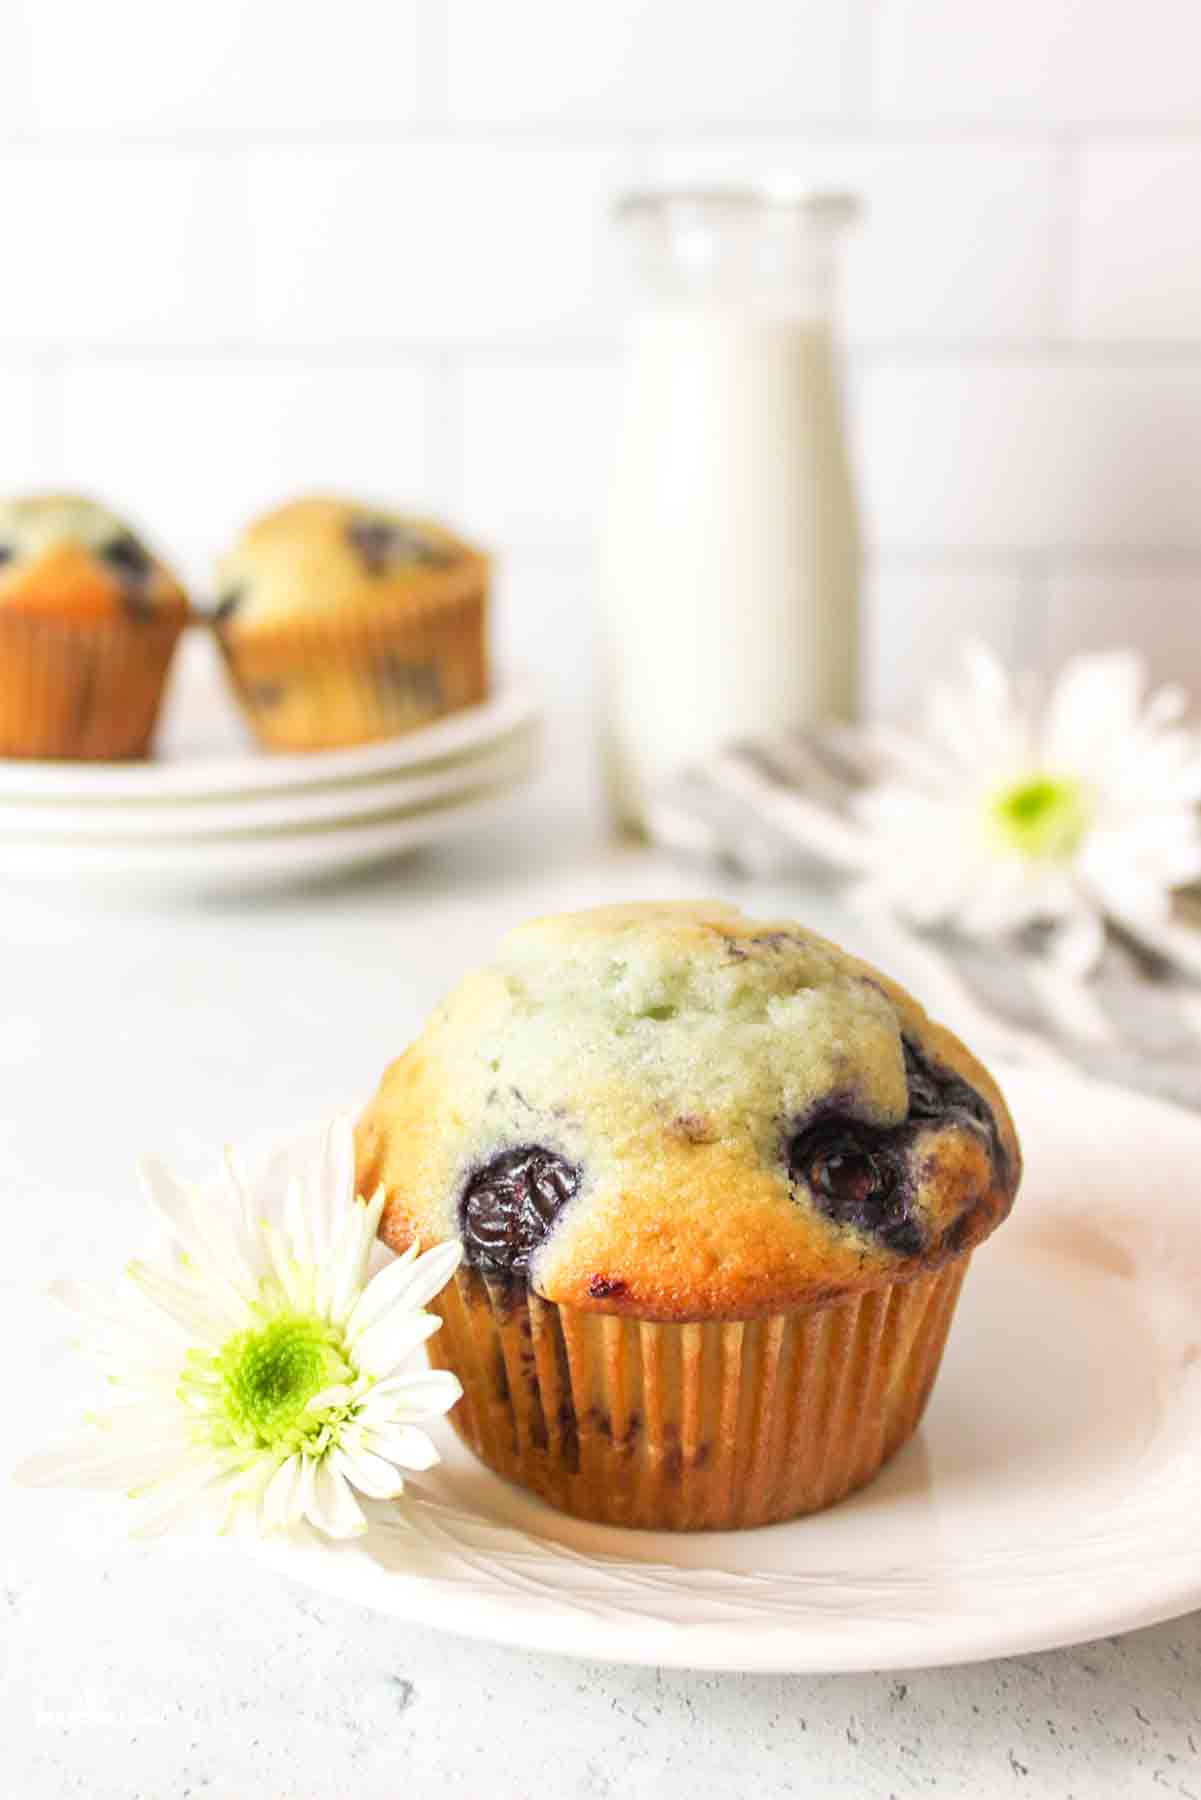 a blueberry muffin on a plate with e white flower and more muffins in background next to milk and another flower